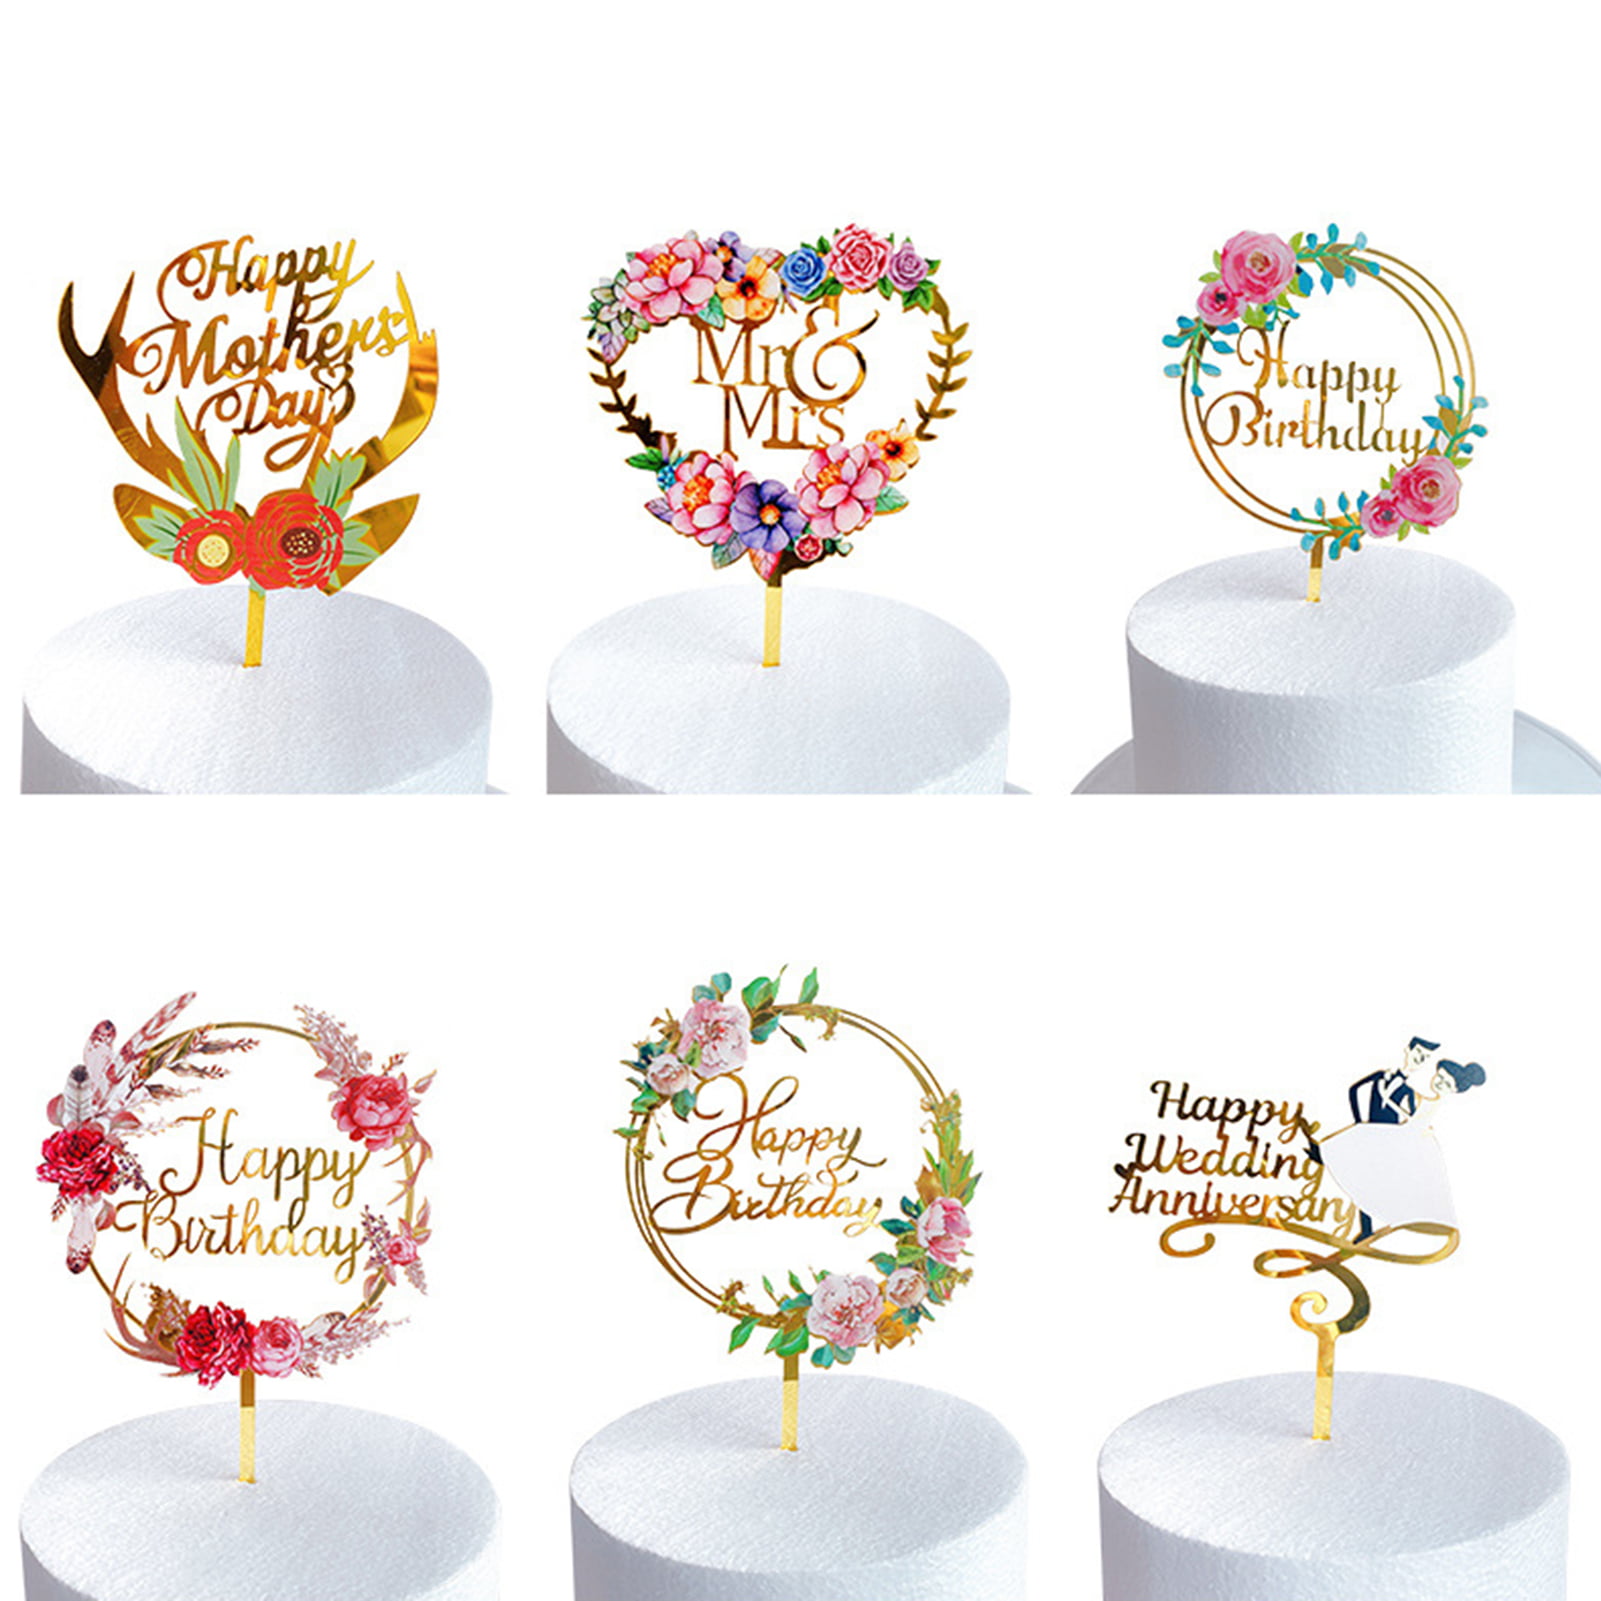 Ludlz Acrylic Glitter Gold Cake Topper Flower Acrylic Cake Toppers ...